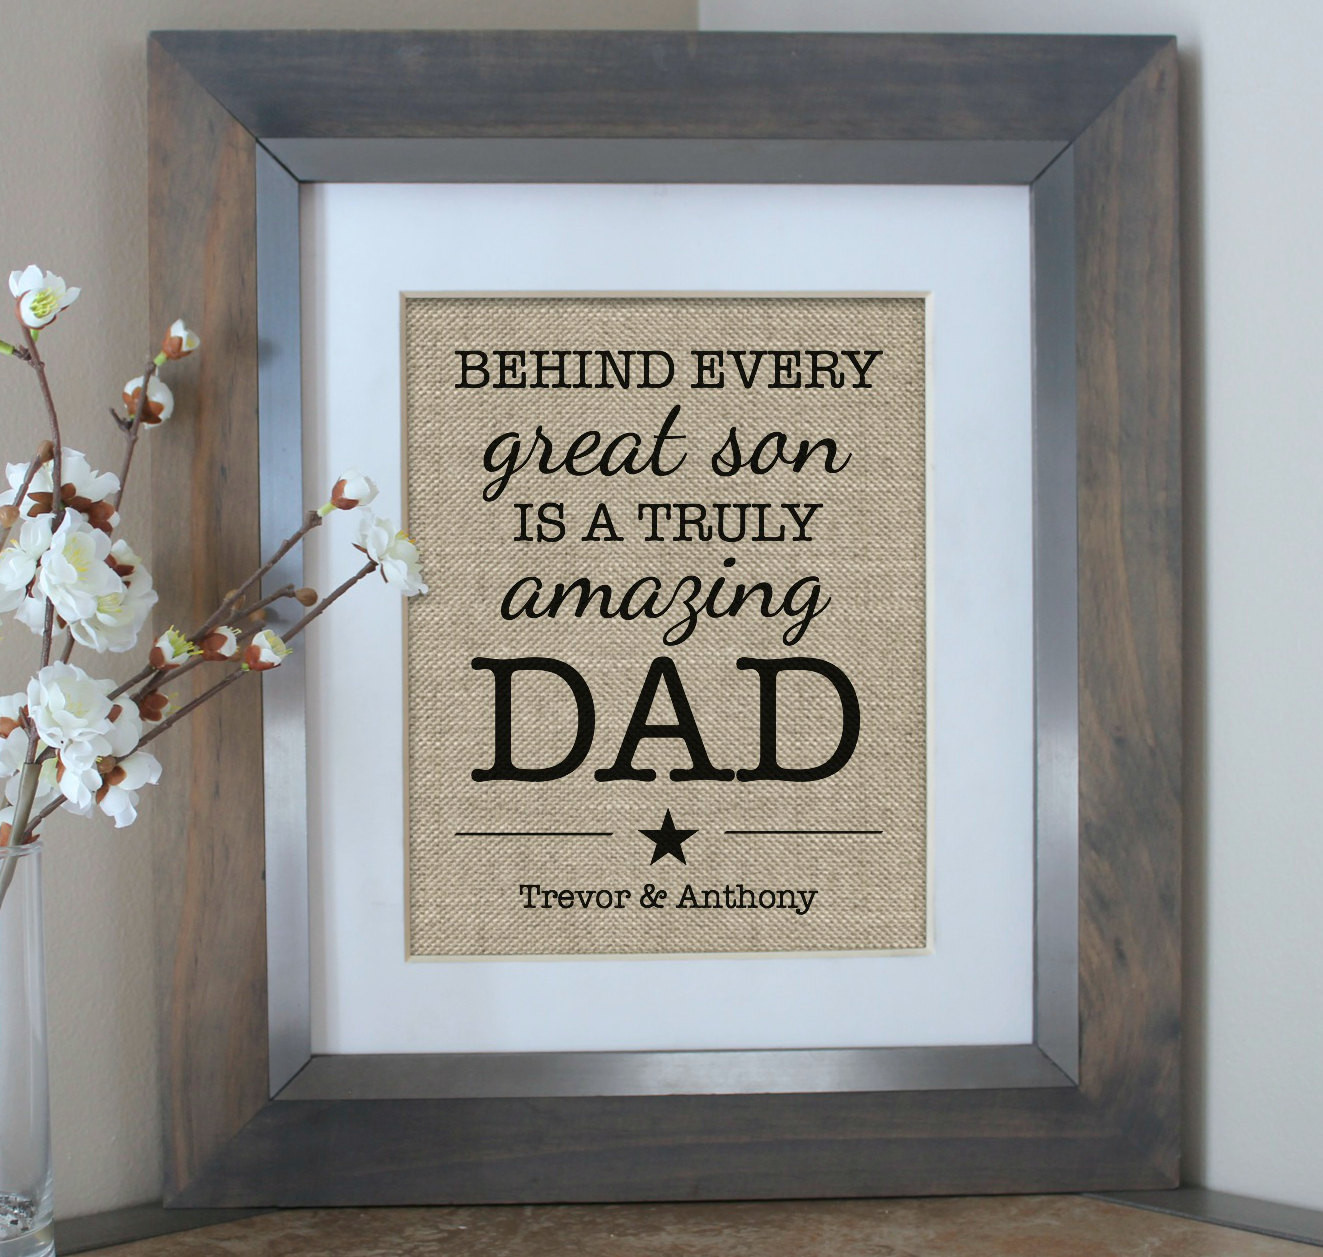 Fathers Day Gift From Sons
 Father s Day Gift from Son Personalized Gift by EmmaAndTheBean